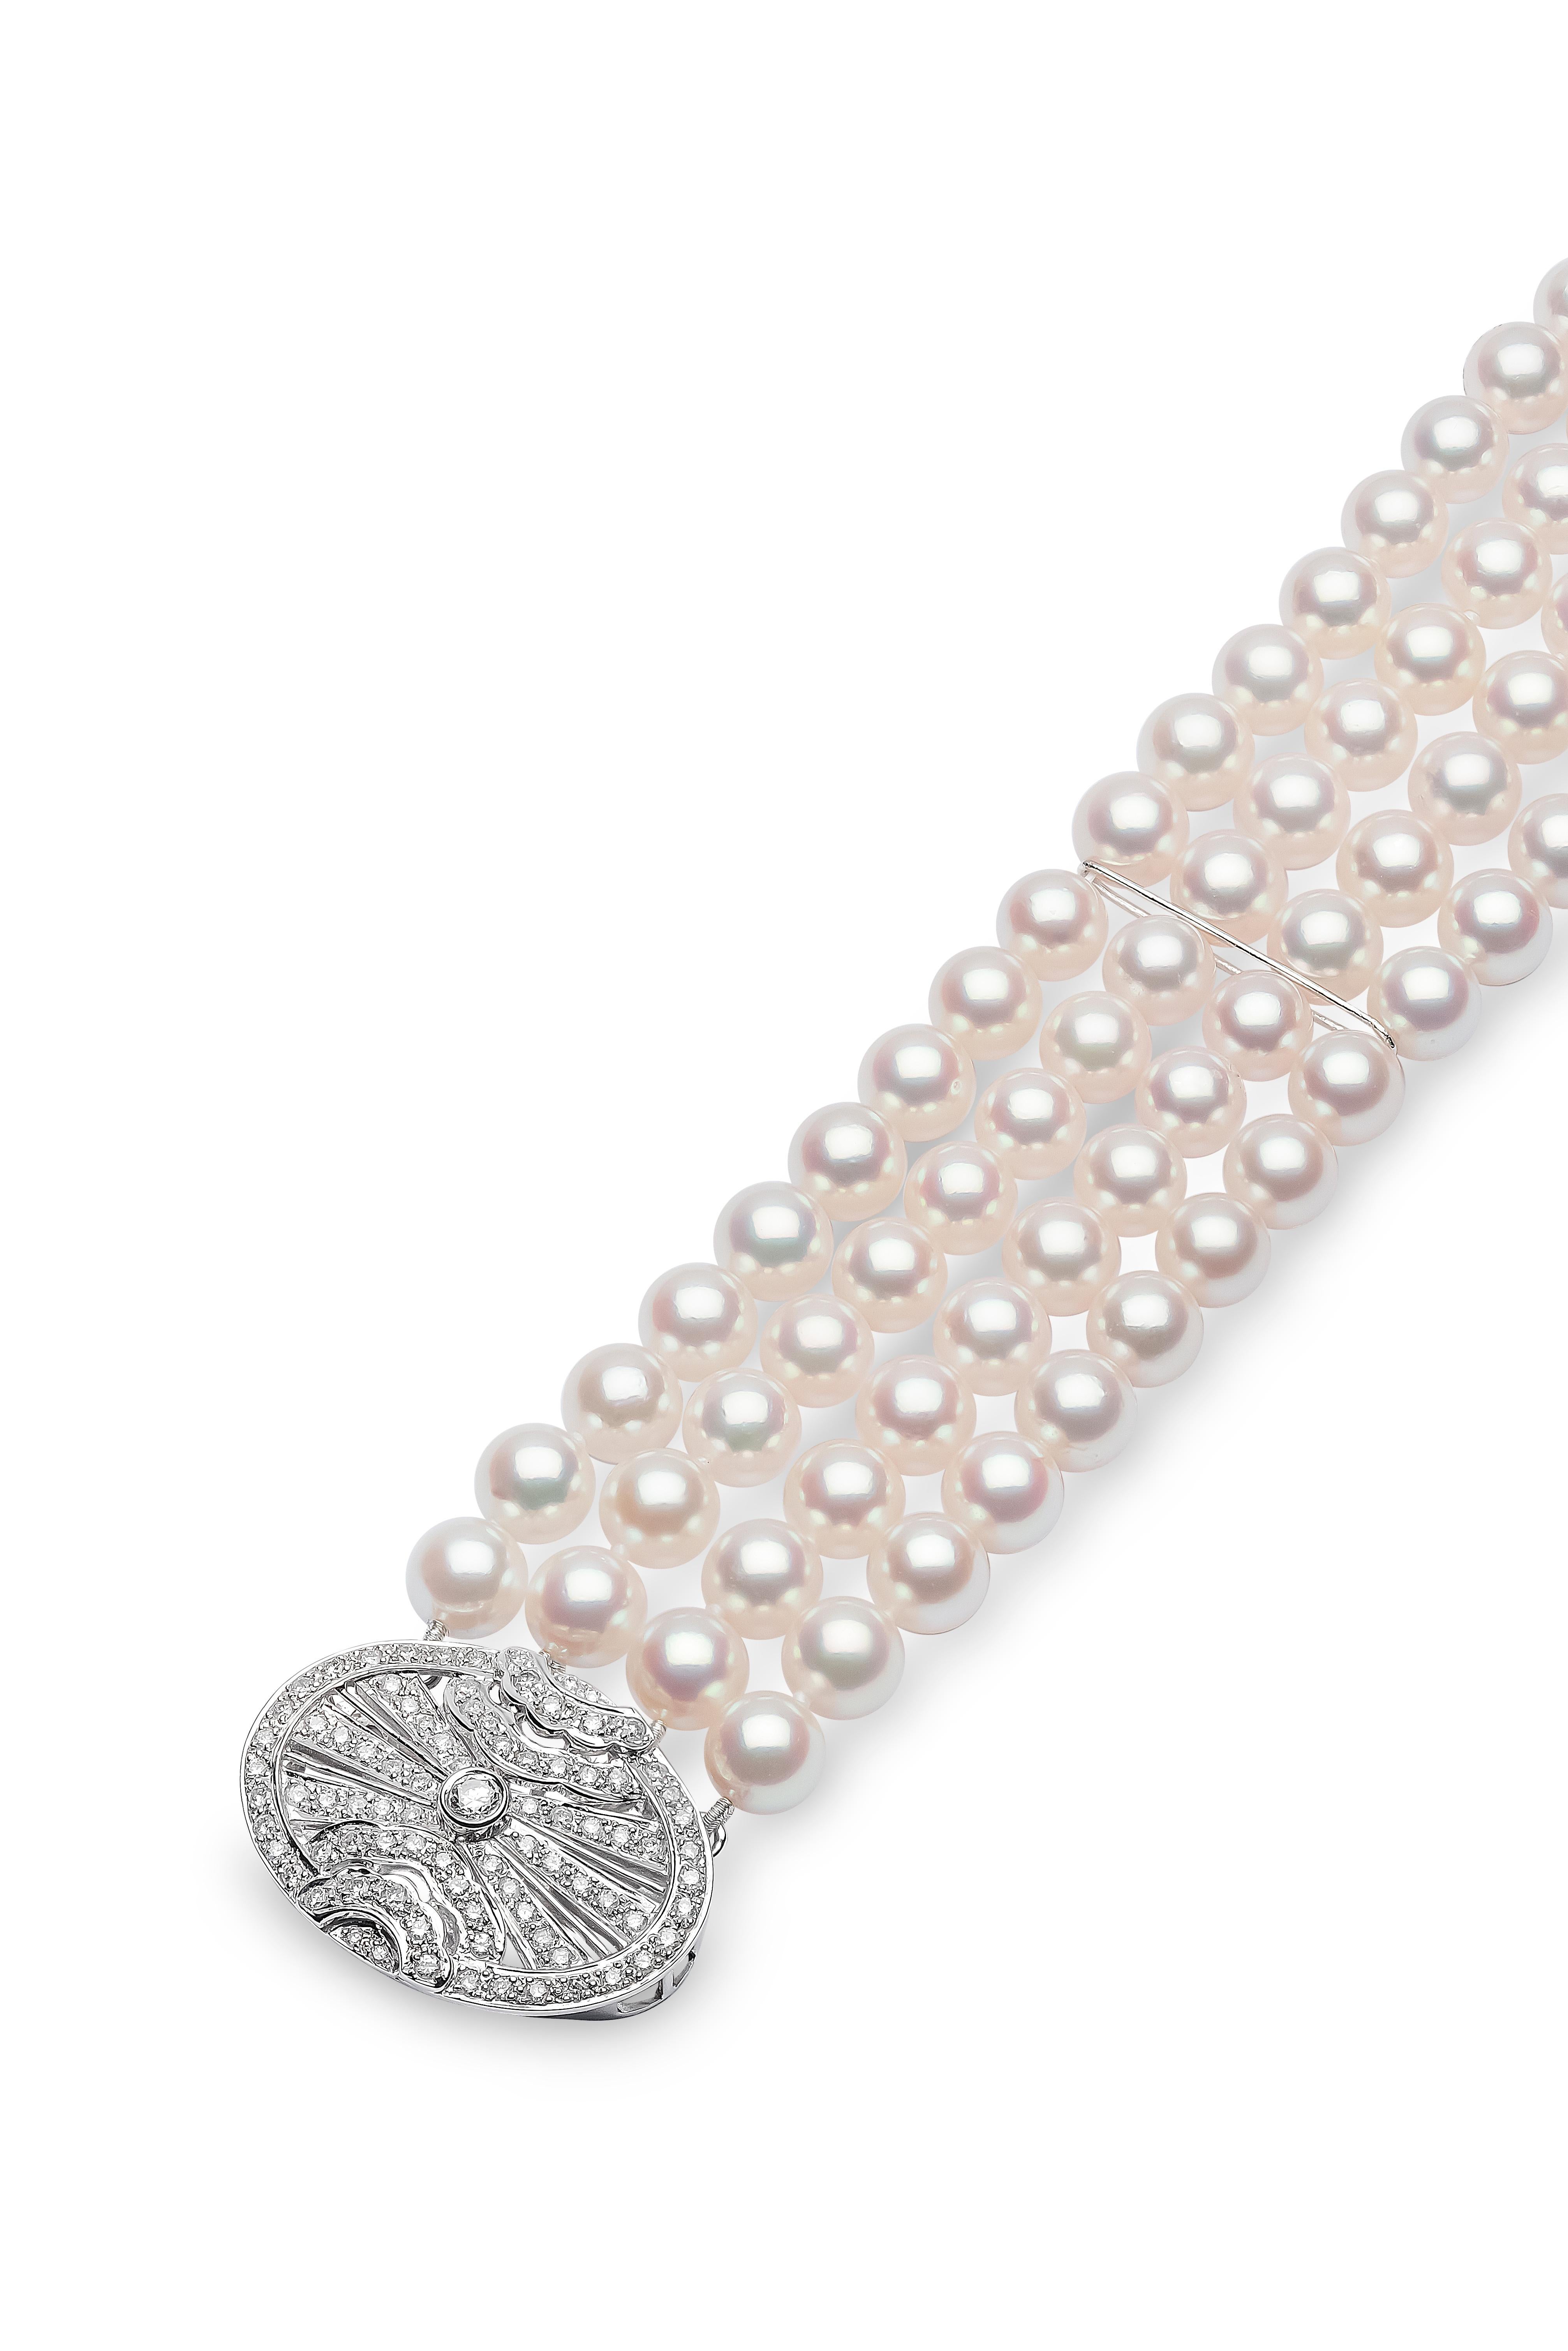 Comprised of timeless, jewellery box staples, our Classic collection is designed to last through the generations. This elegant choker features four rows of lustrous Akoya pearls, accentuated by an ornate diamond clasp which can be worn at the front